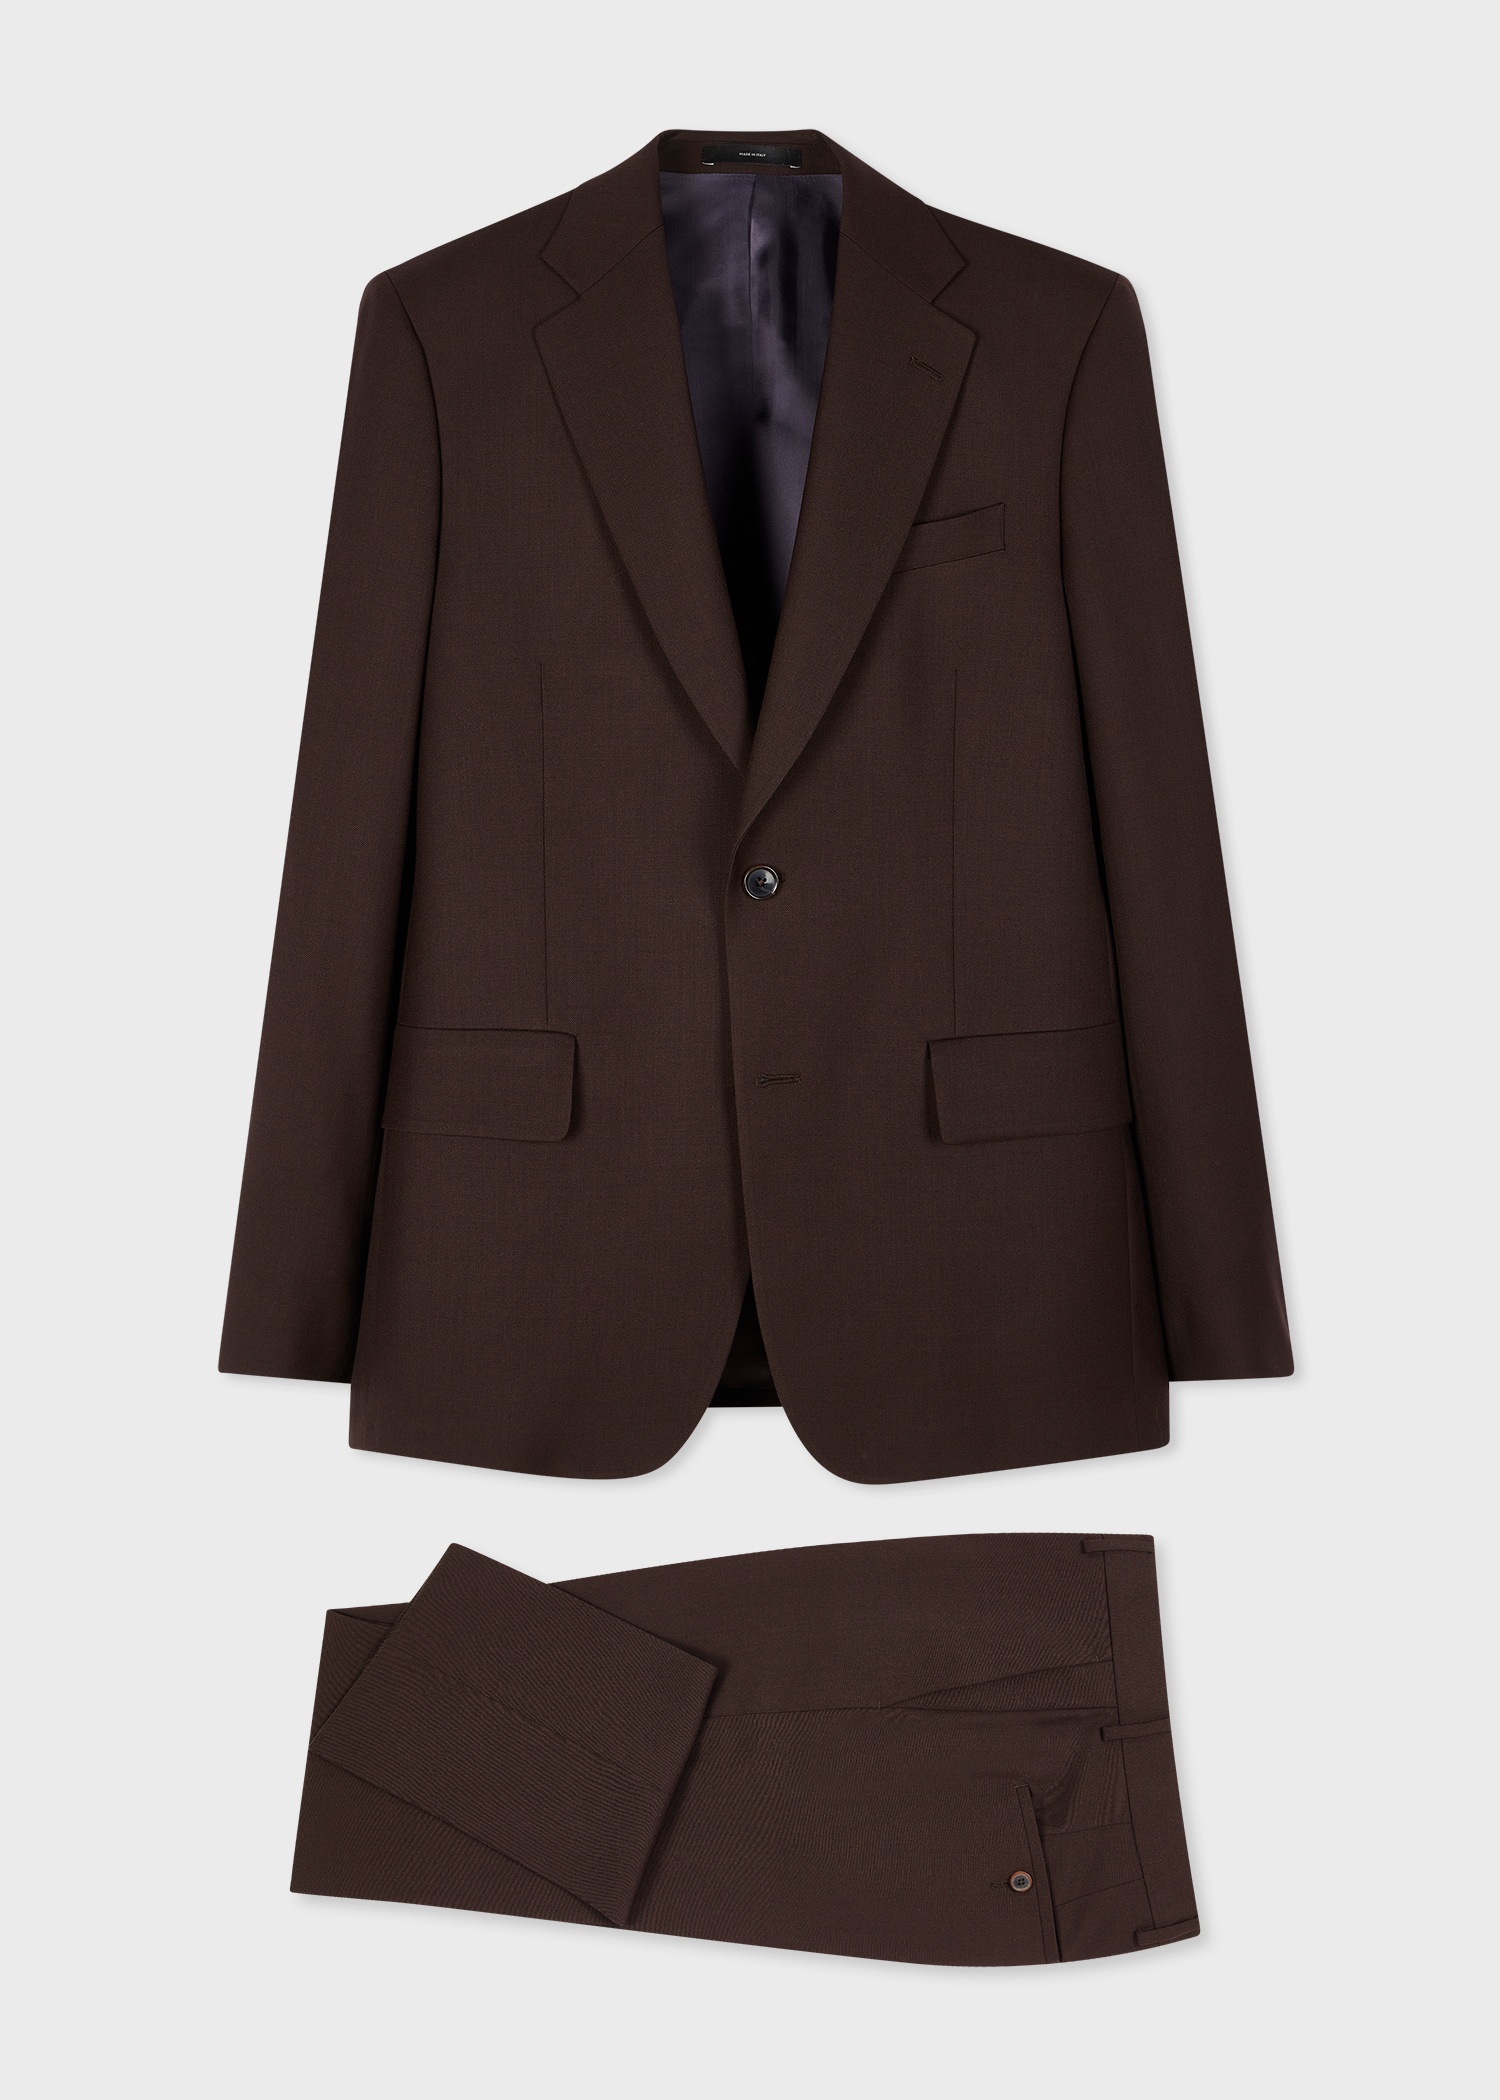 The Brierley - Brown Wool 'A Suit To Travel In' - 1